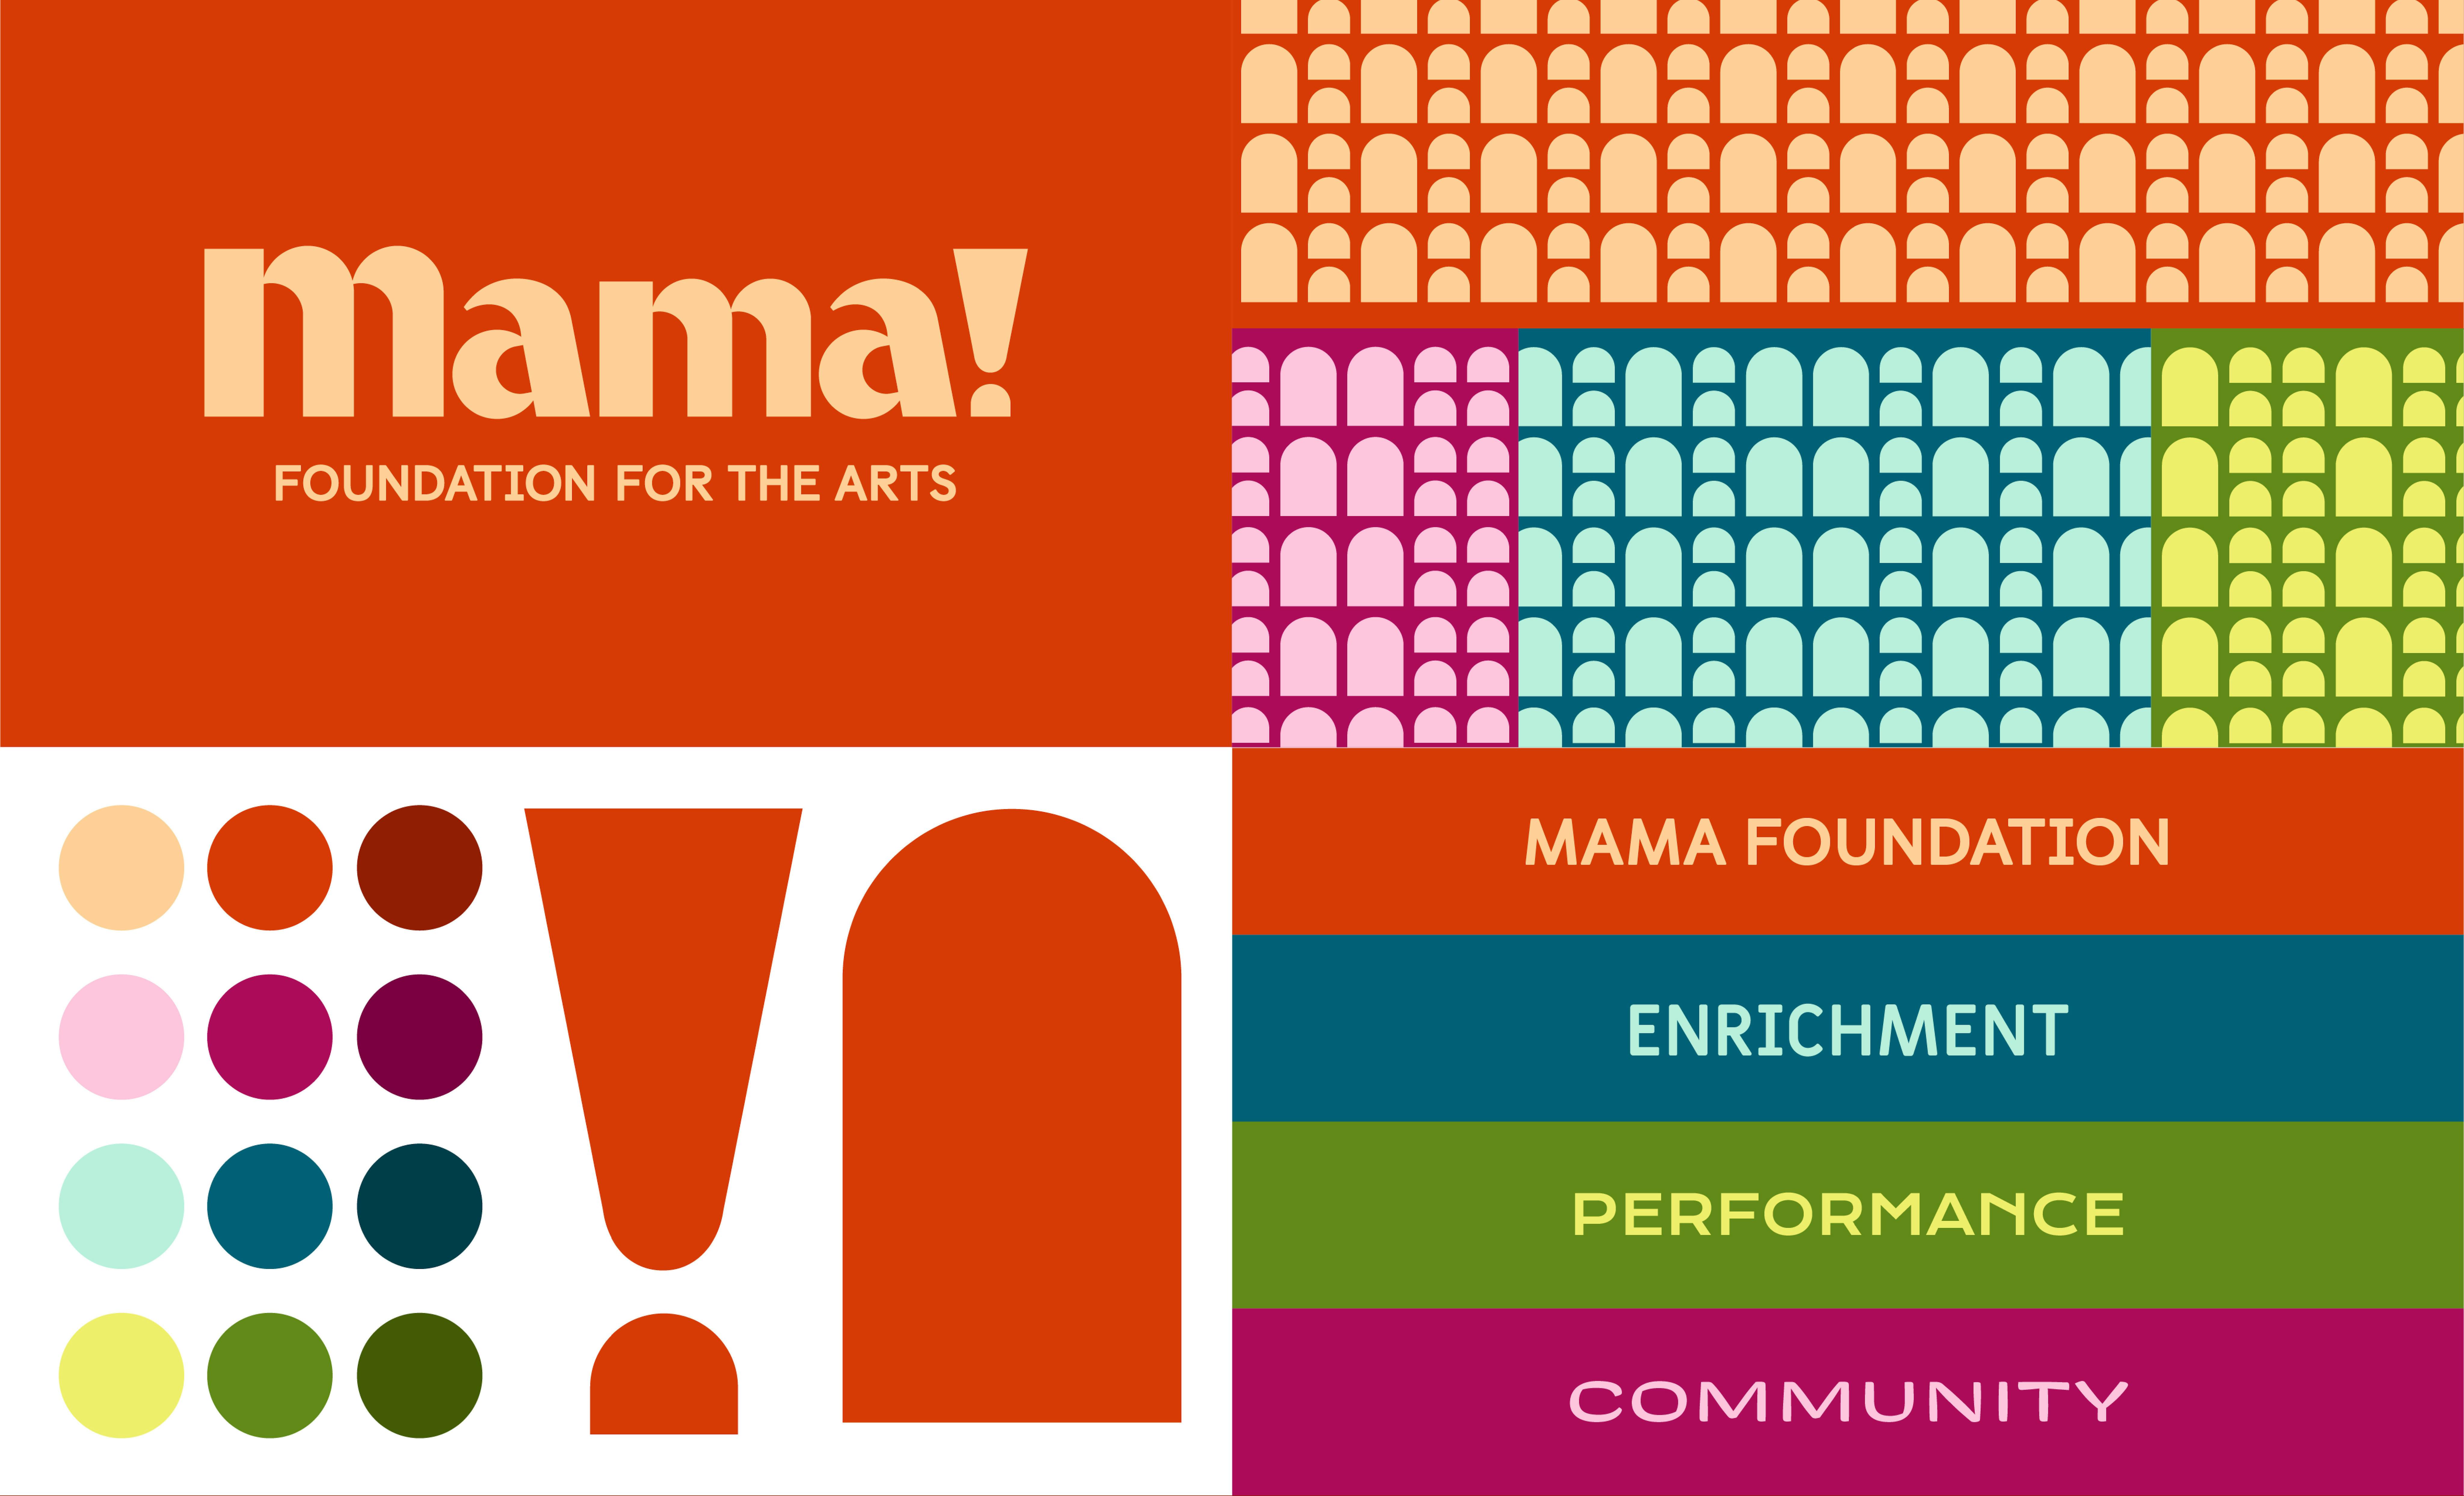 Mama foundation for the arts branding